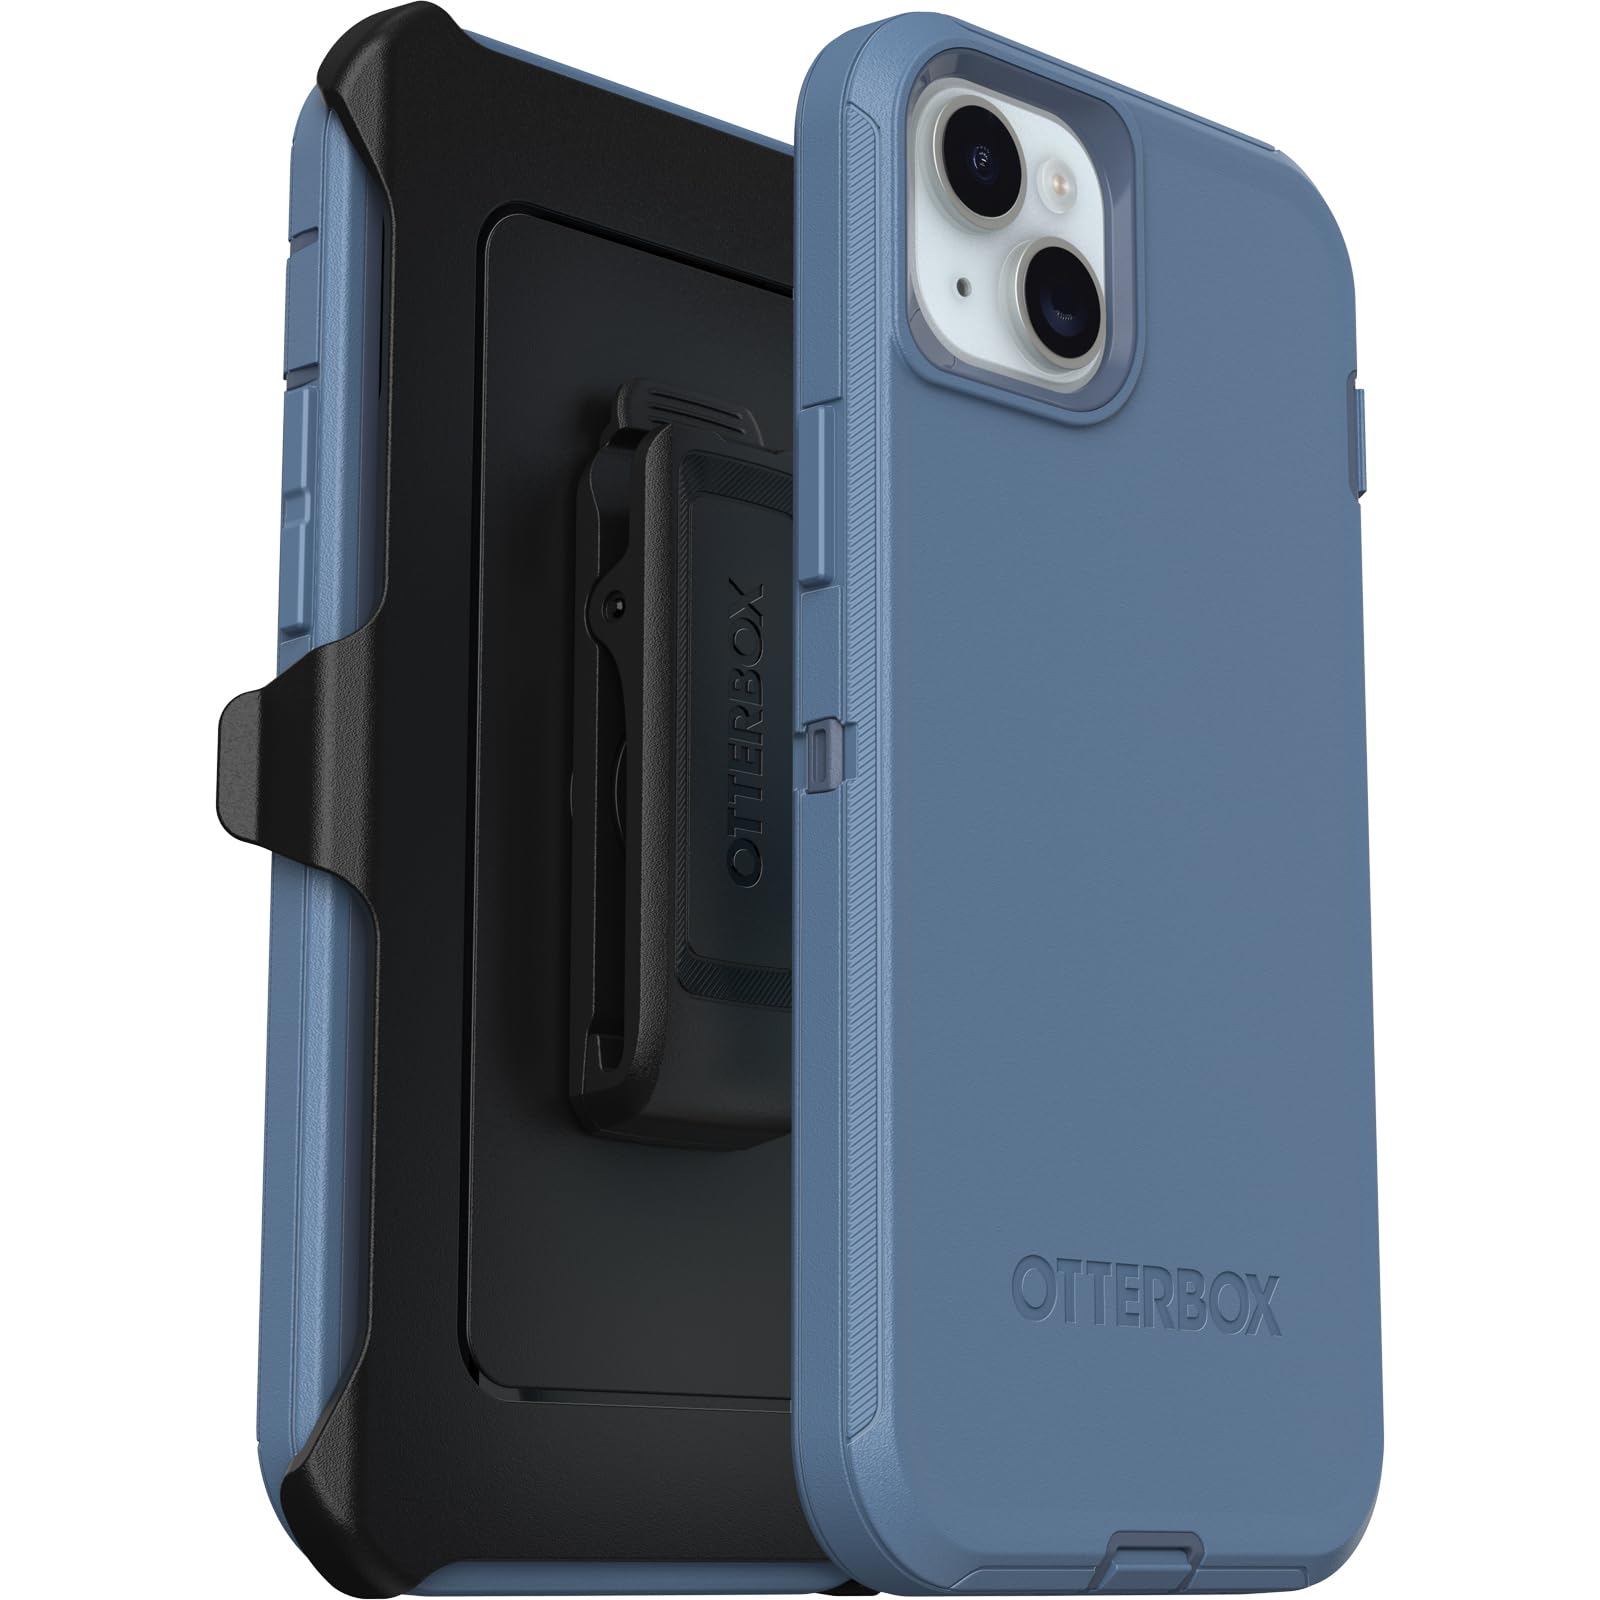 OtterBox iPhone 15 Plus and iPhone 14 Plus Defender Series Case - BABY BLUE JEANS (Blue), screenless, rugged & durable, with port protection, includes holster clip kickstand